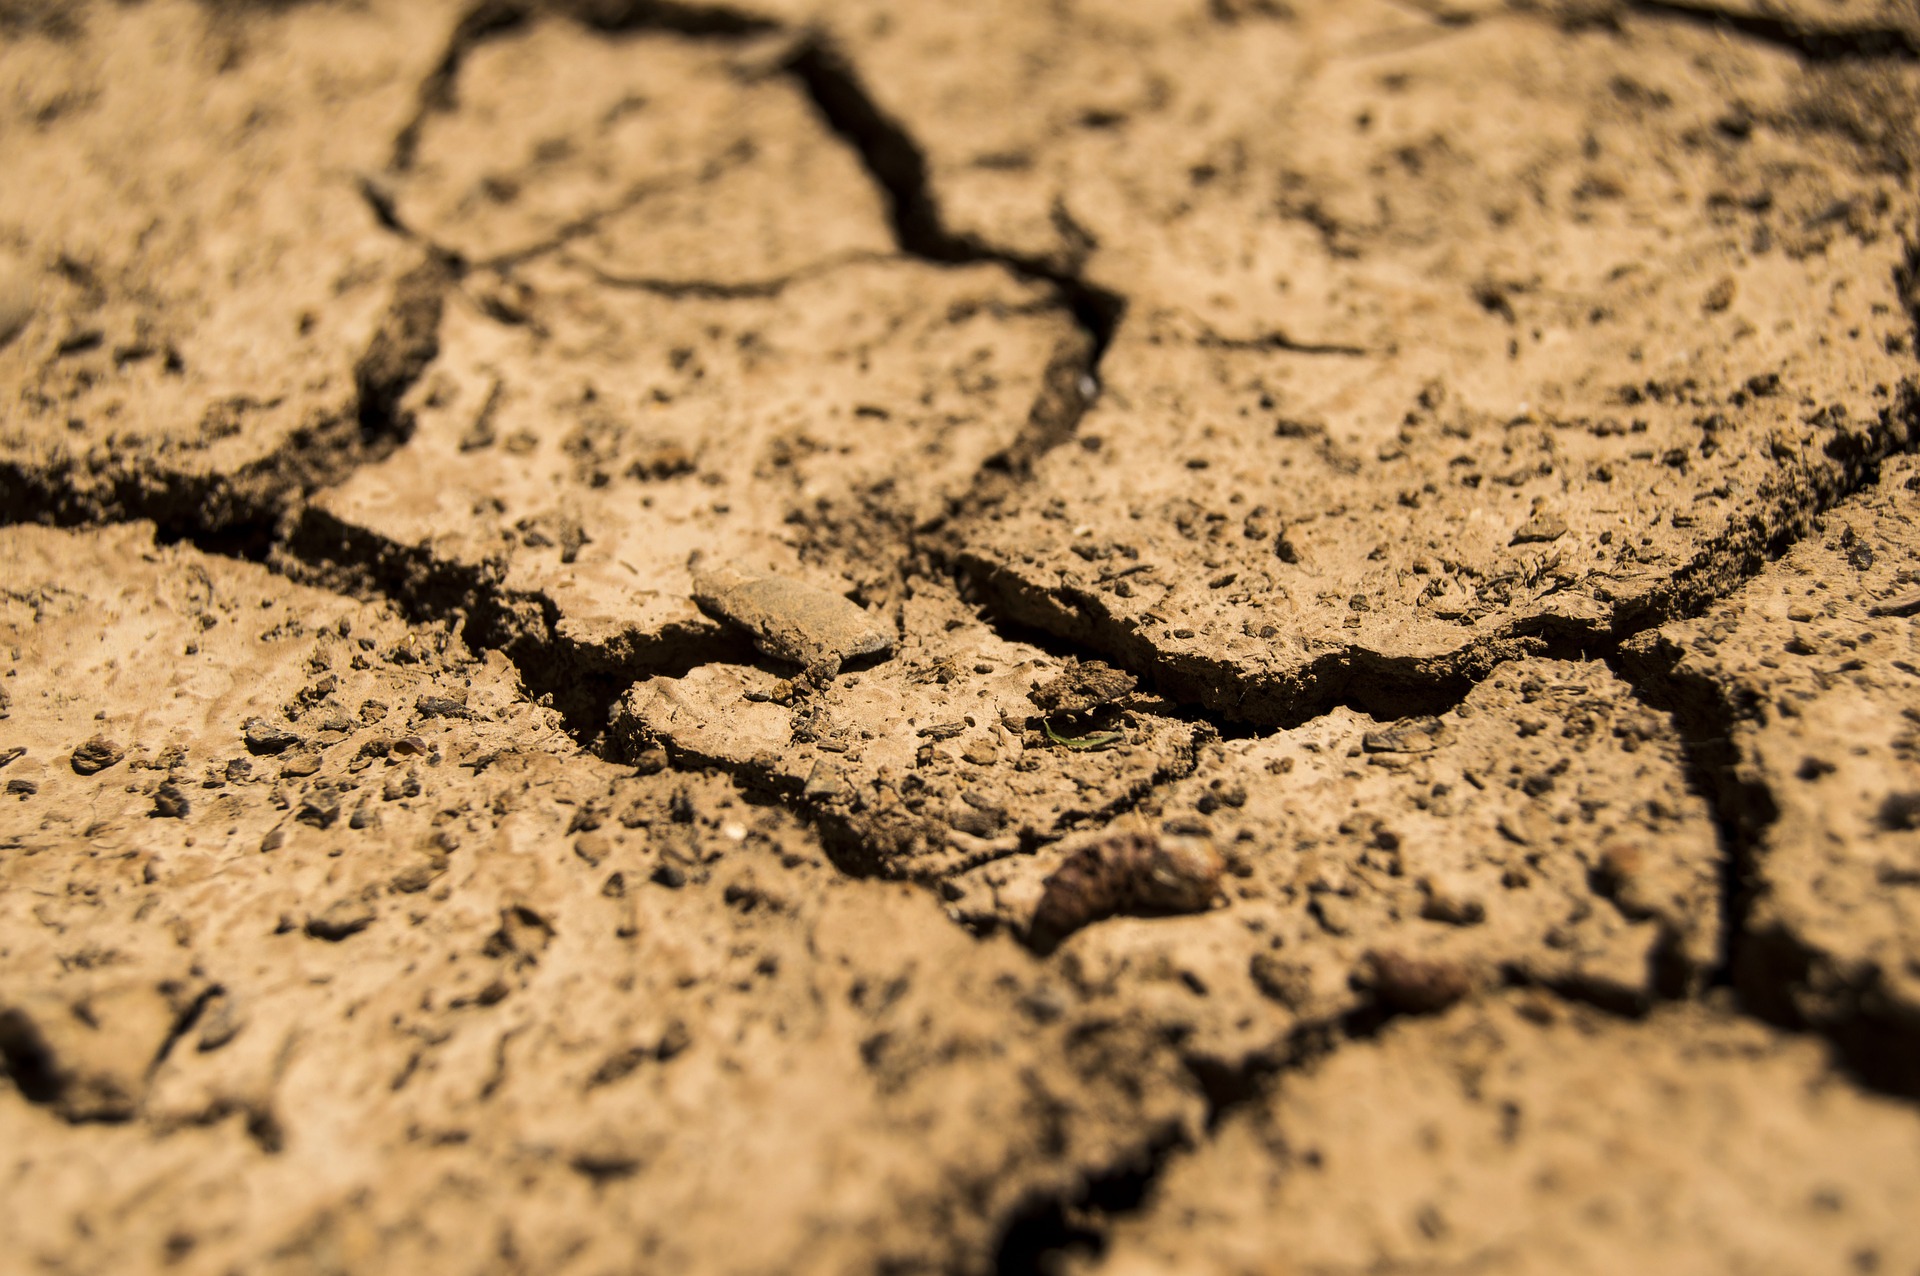 Dry cracked earth in heat stricken areas of drought